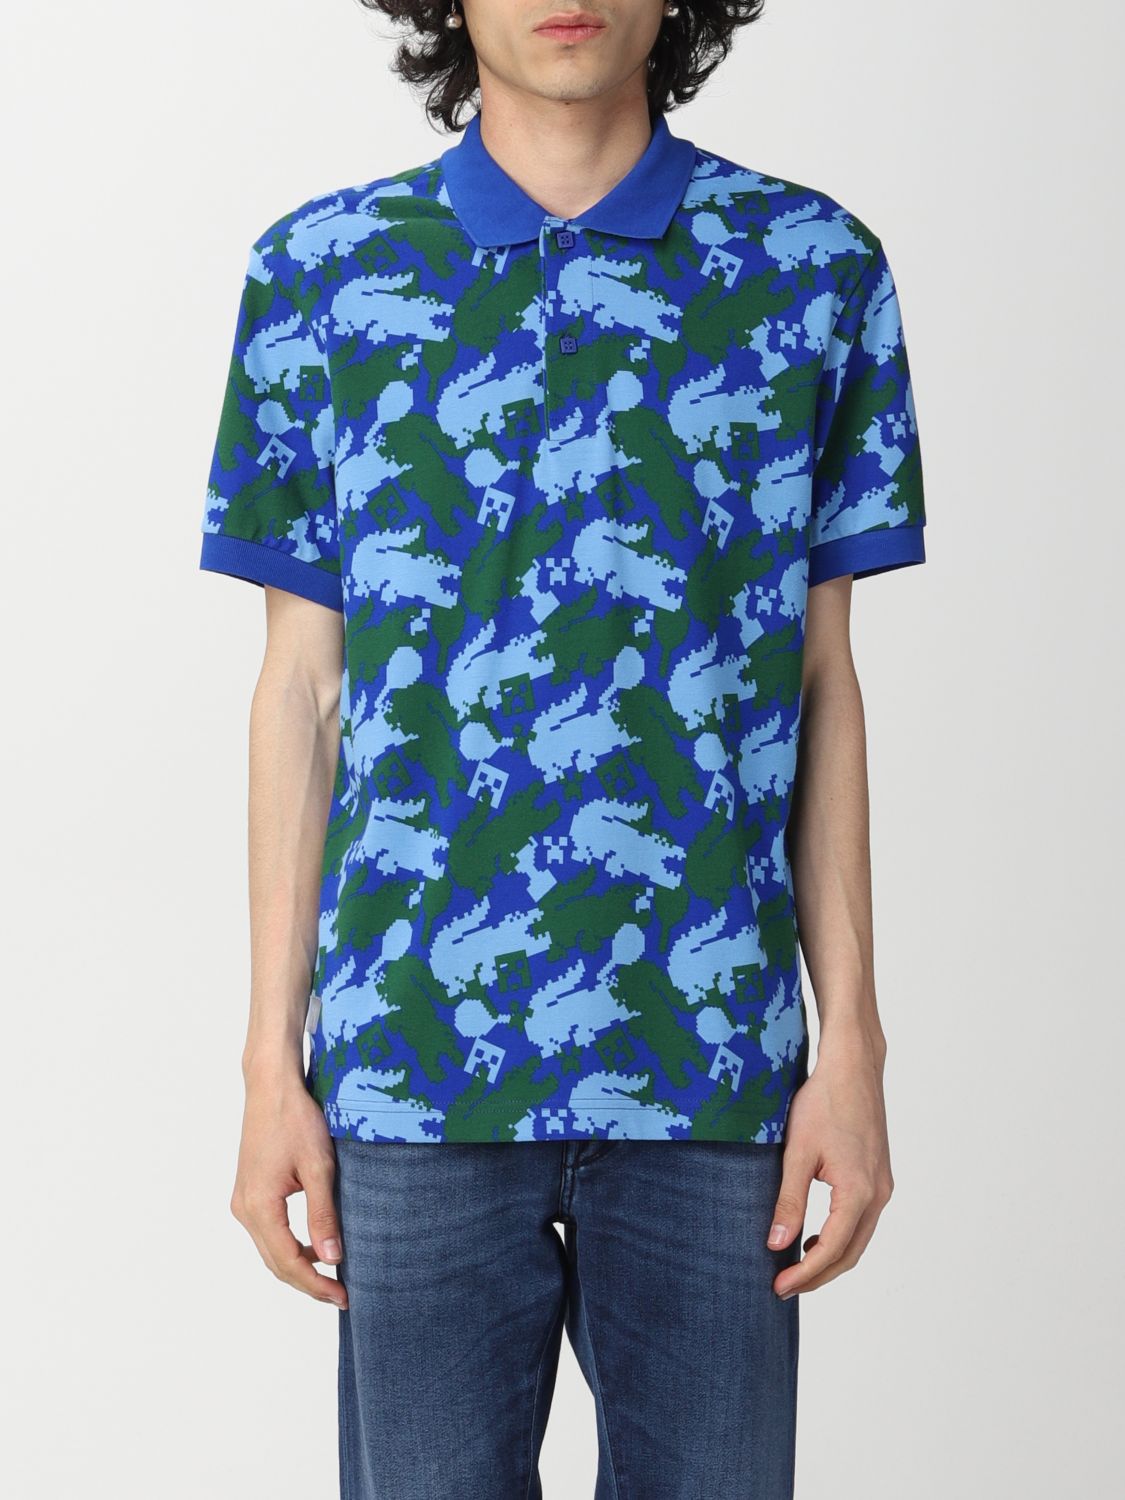 Lacoste x Minecraft Unisex Blue All Over Graphic Print Short Sleeve Polo  Shirt